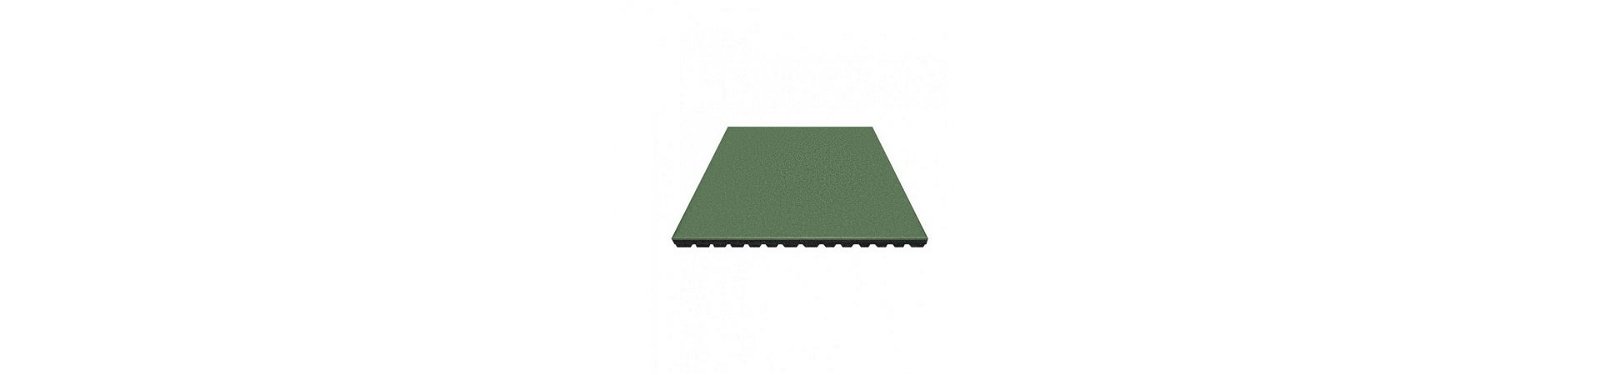 Mats for the playground in various colors and sizes. Safe surfaces